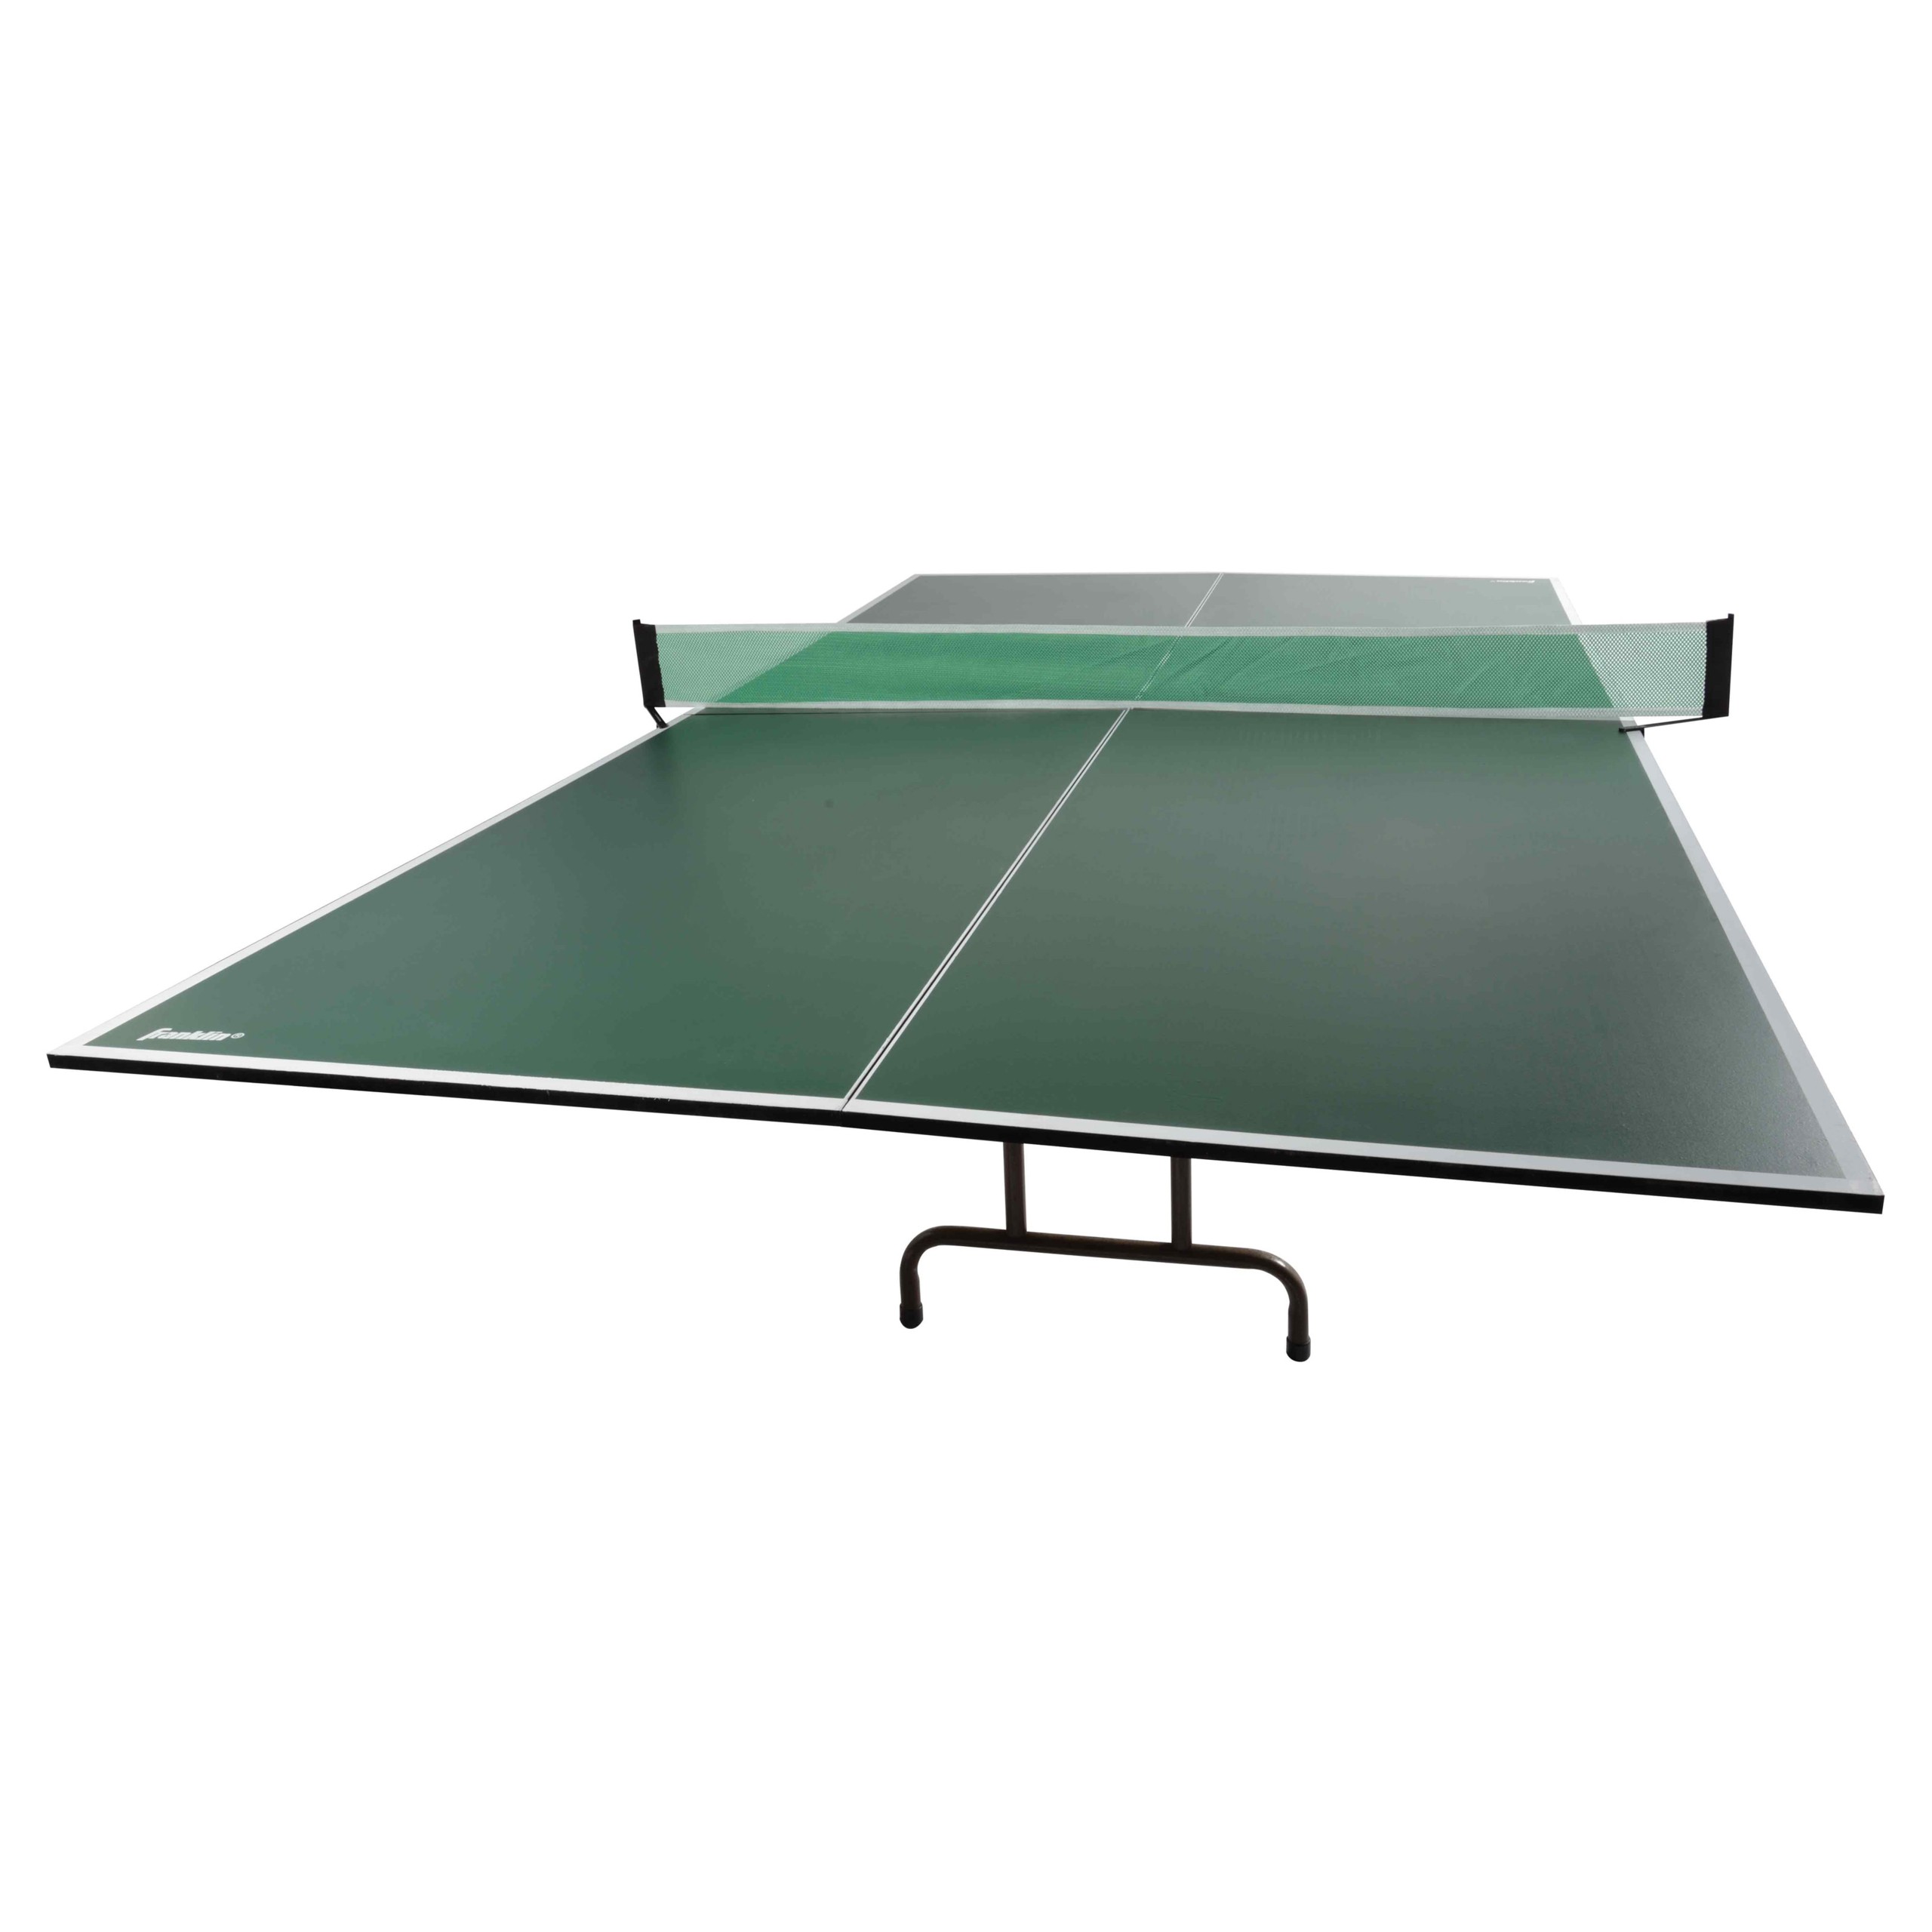 4 Piece Table Tennis Conversion Top Table Tennis Table